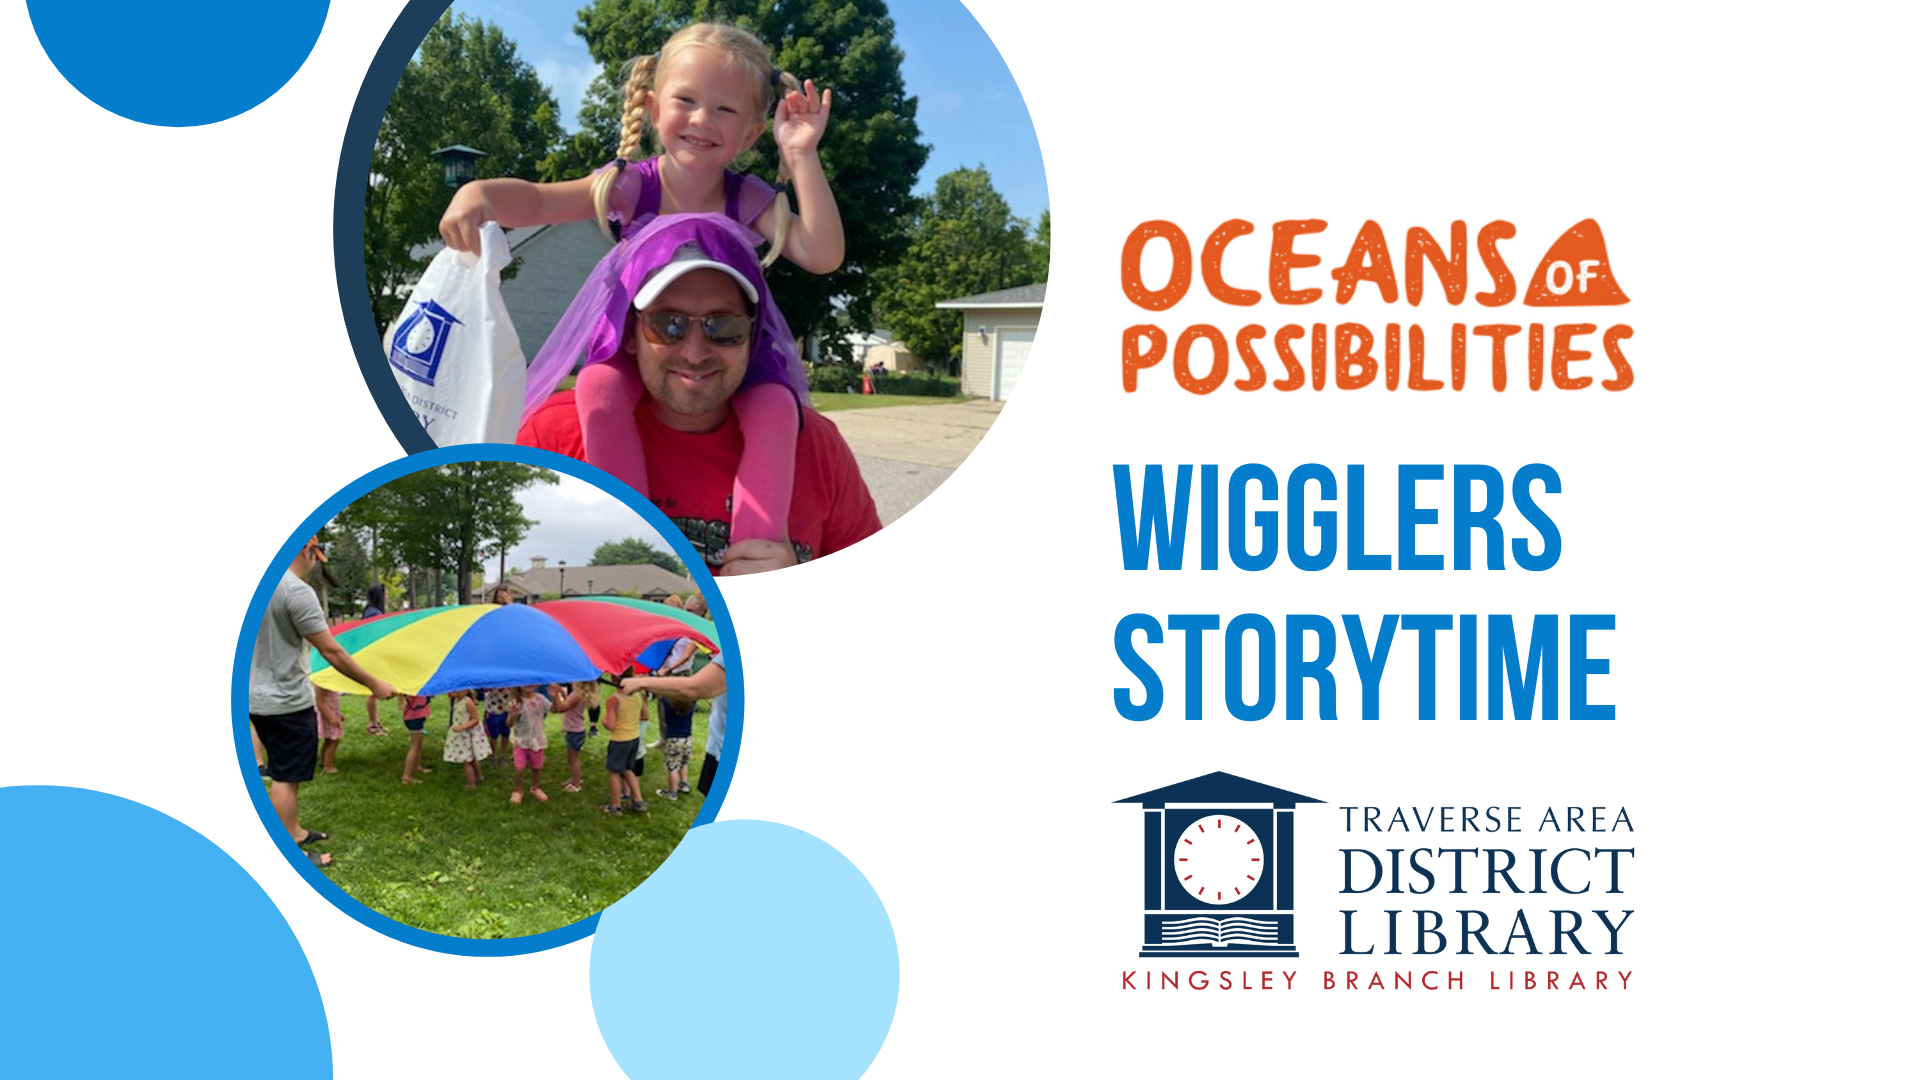 Text in image reads "oceans of possibilities wigglers storytime kingsley branch library." Image of man with child riding on his back, and group of children and adults playing with oversized colorful sheet.